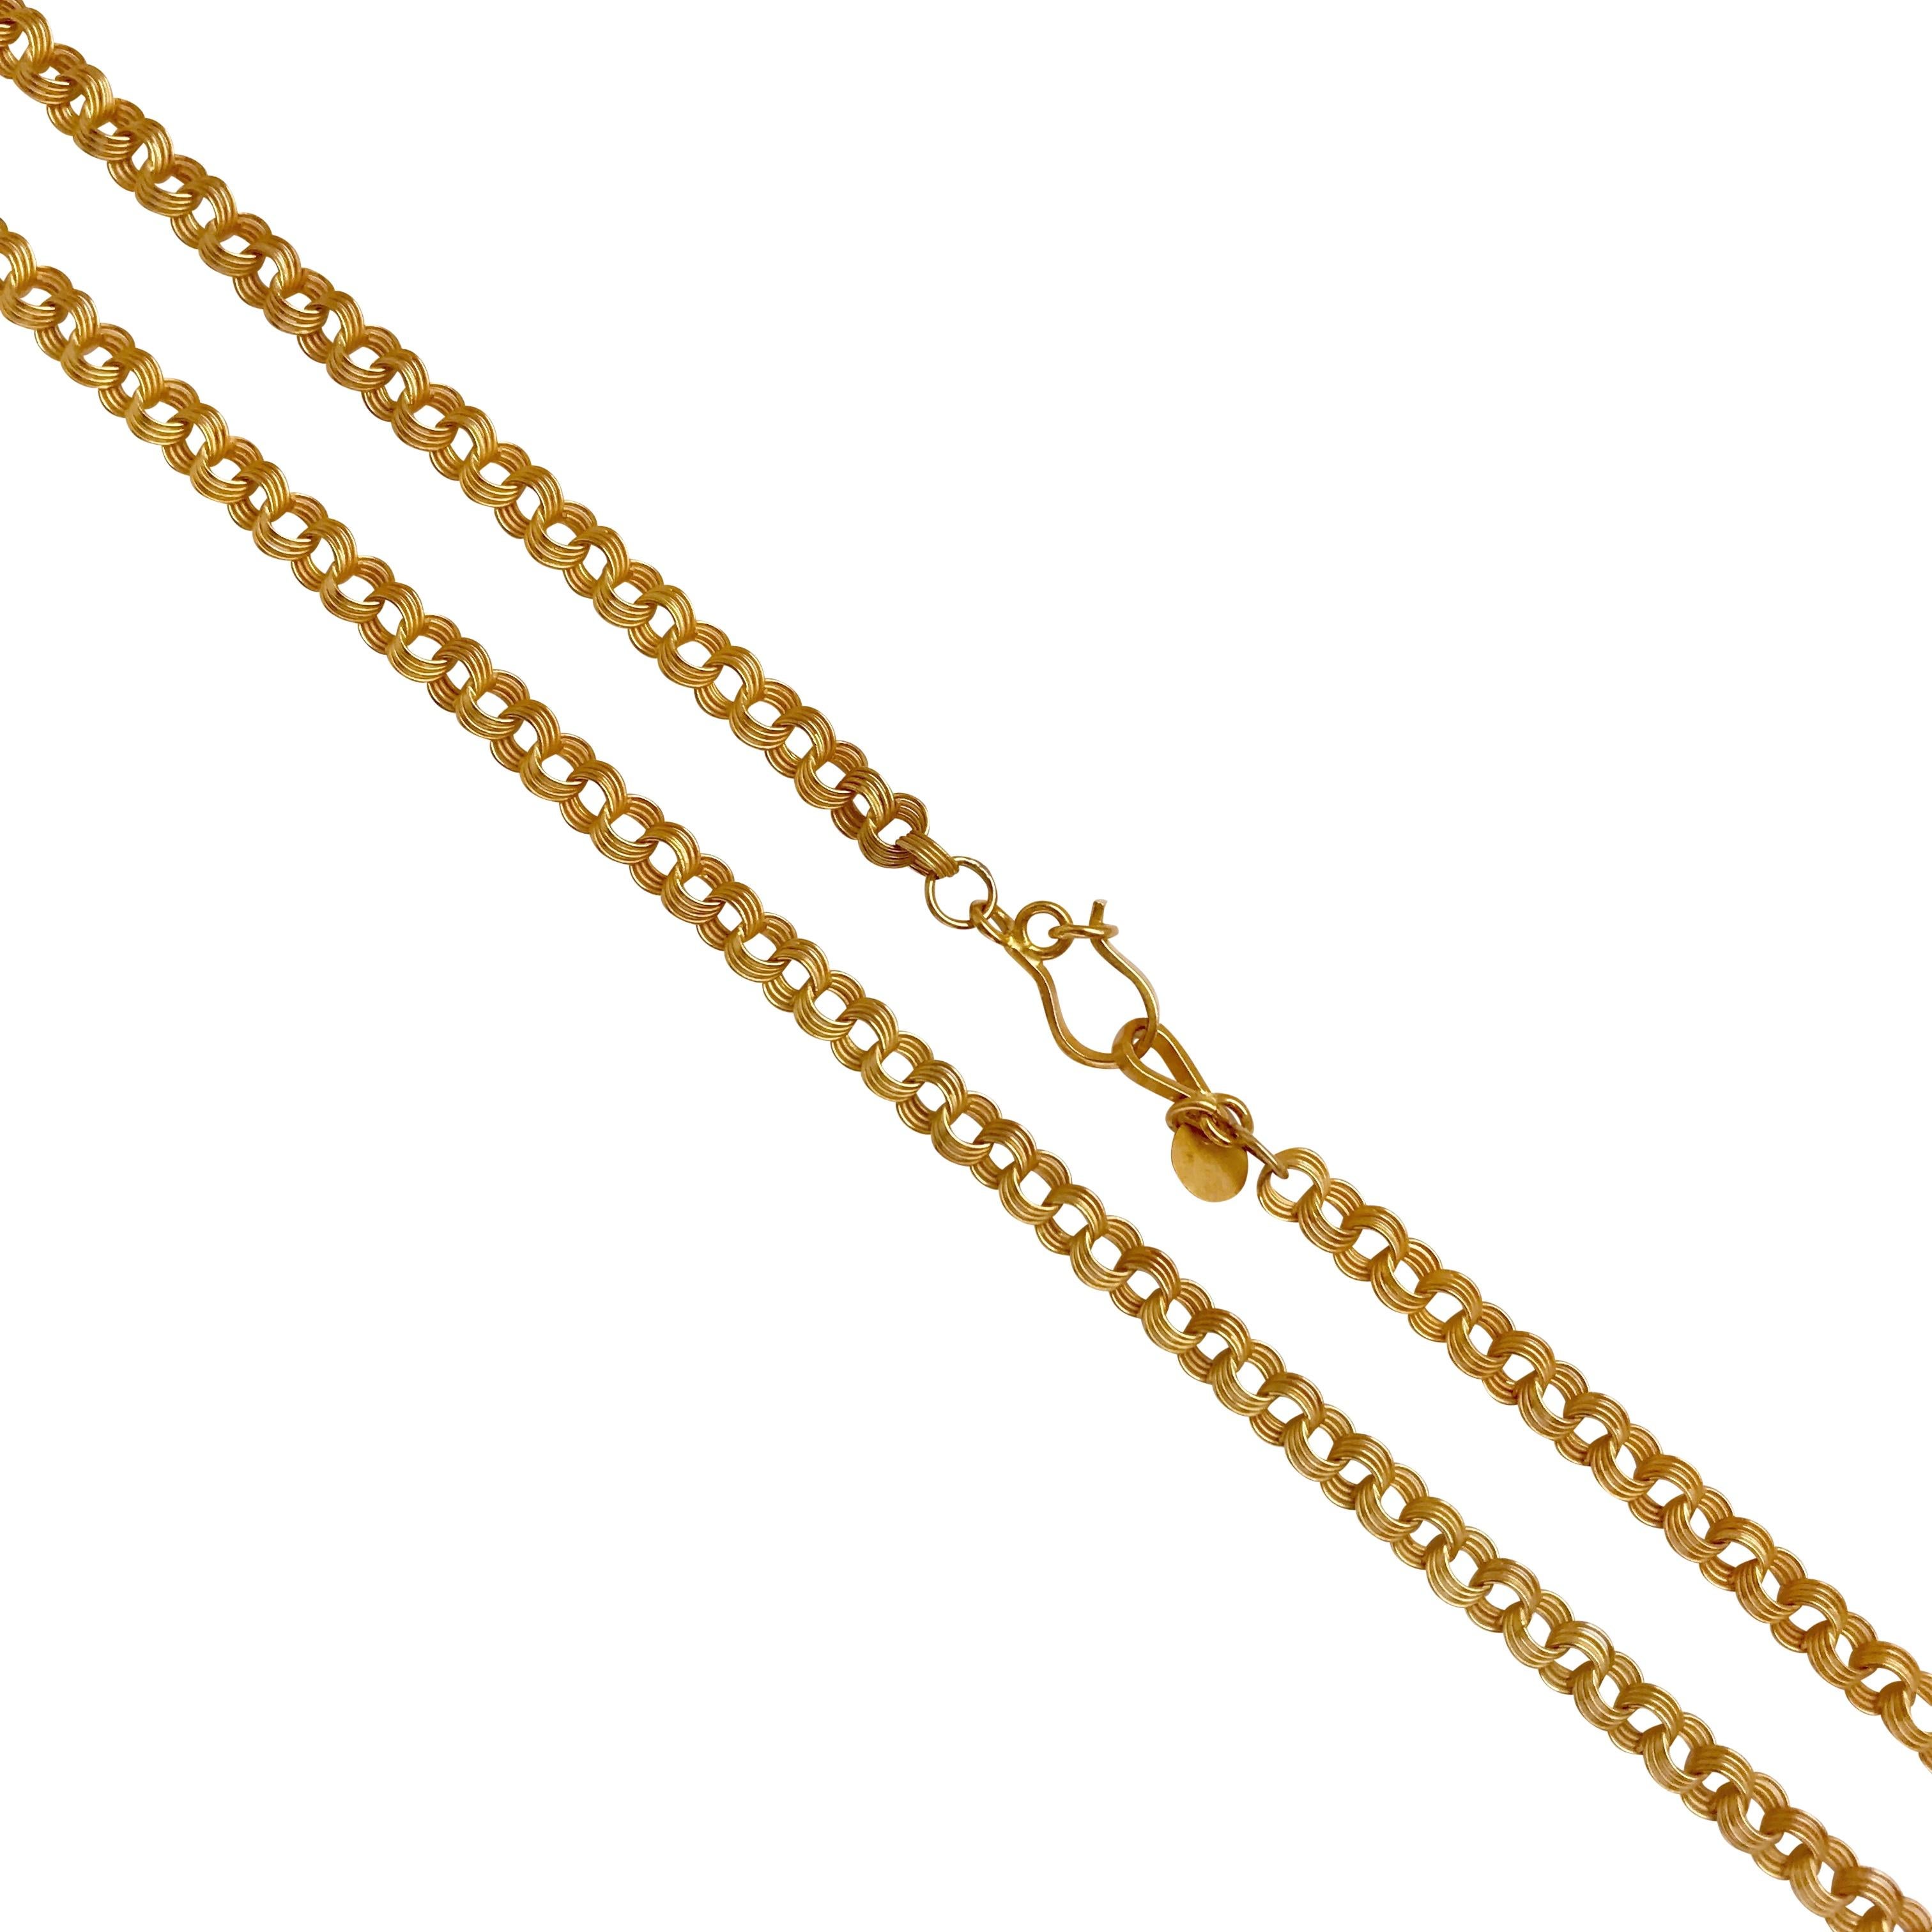 Handmade 18 Karat Solid Yellow Gold Satin Finish Link Chain Necklace  For Sale